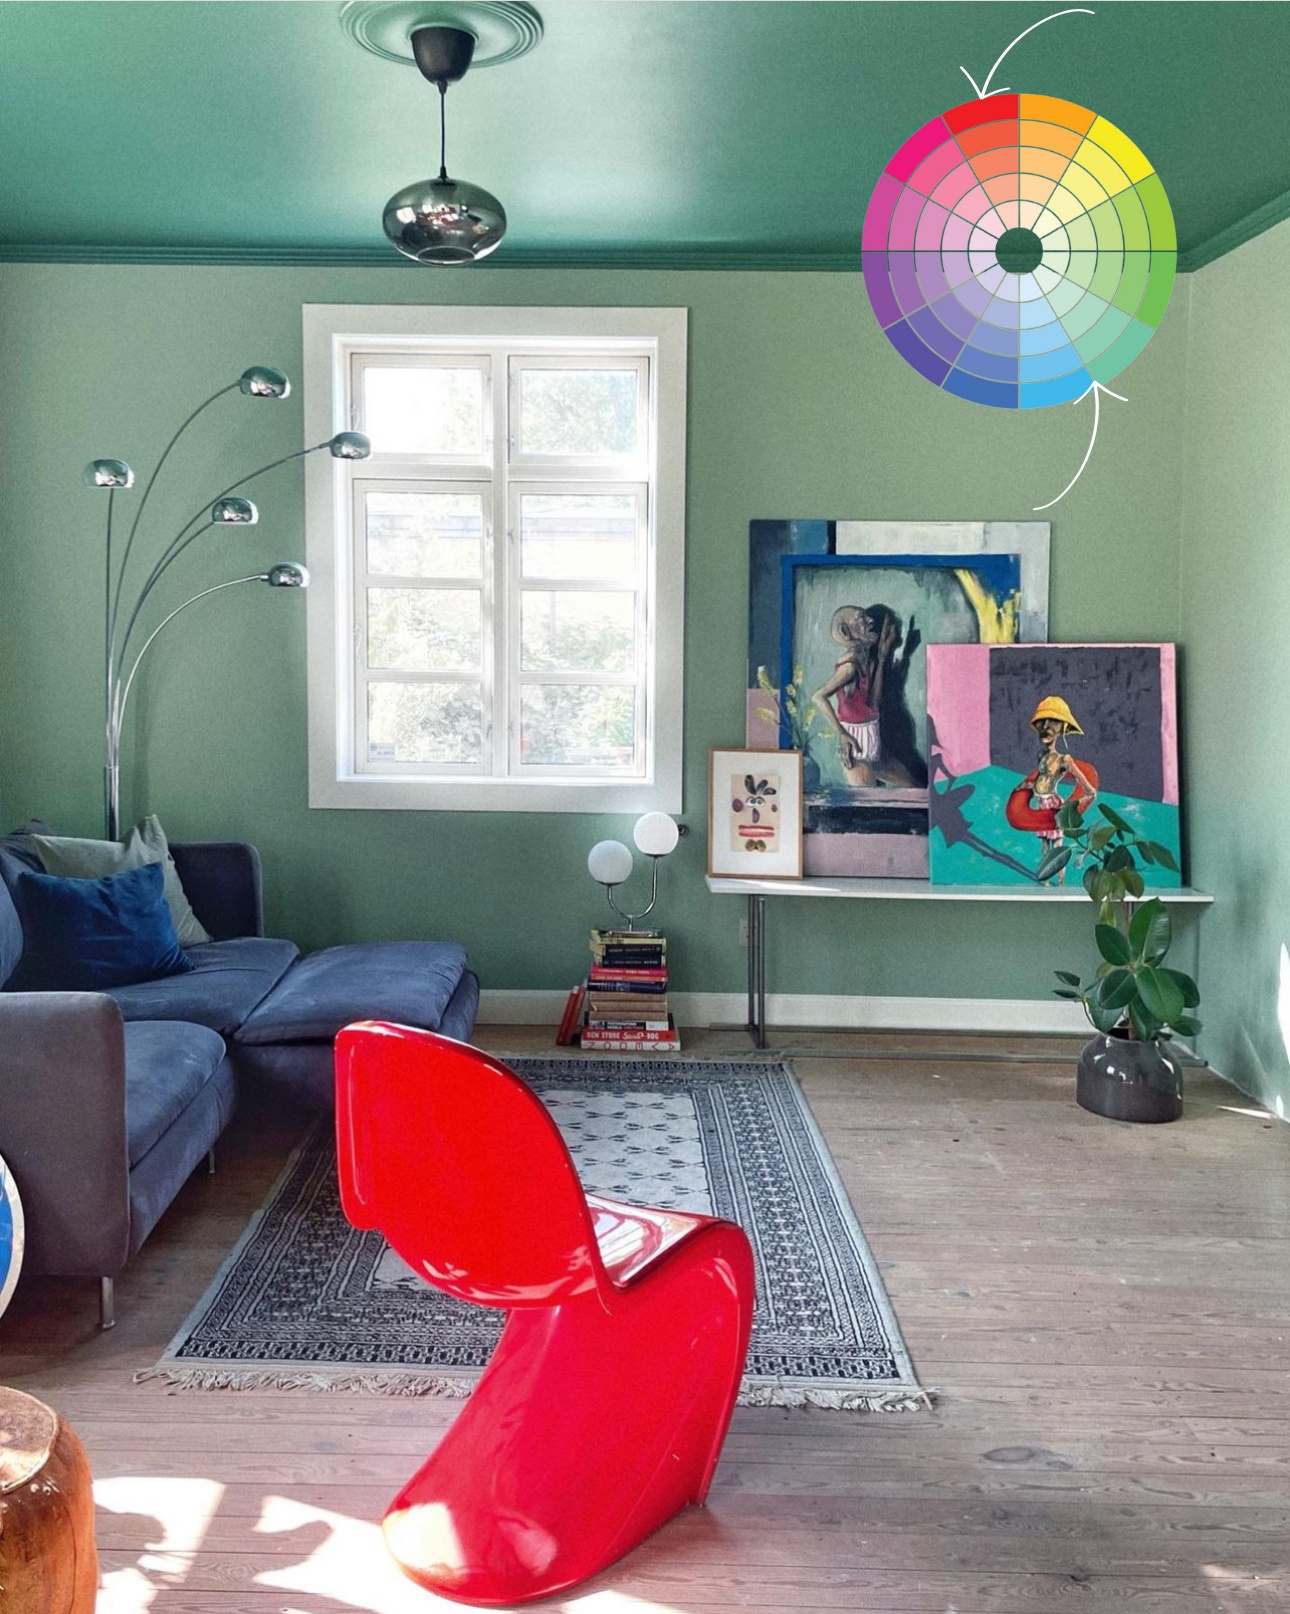 Green/Blue Danish style living room with verner panthon chair in red.